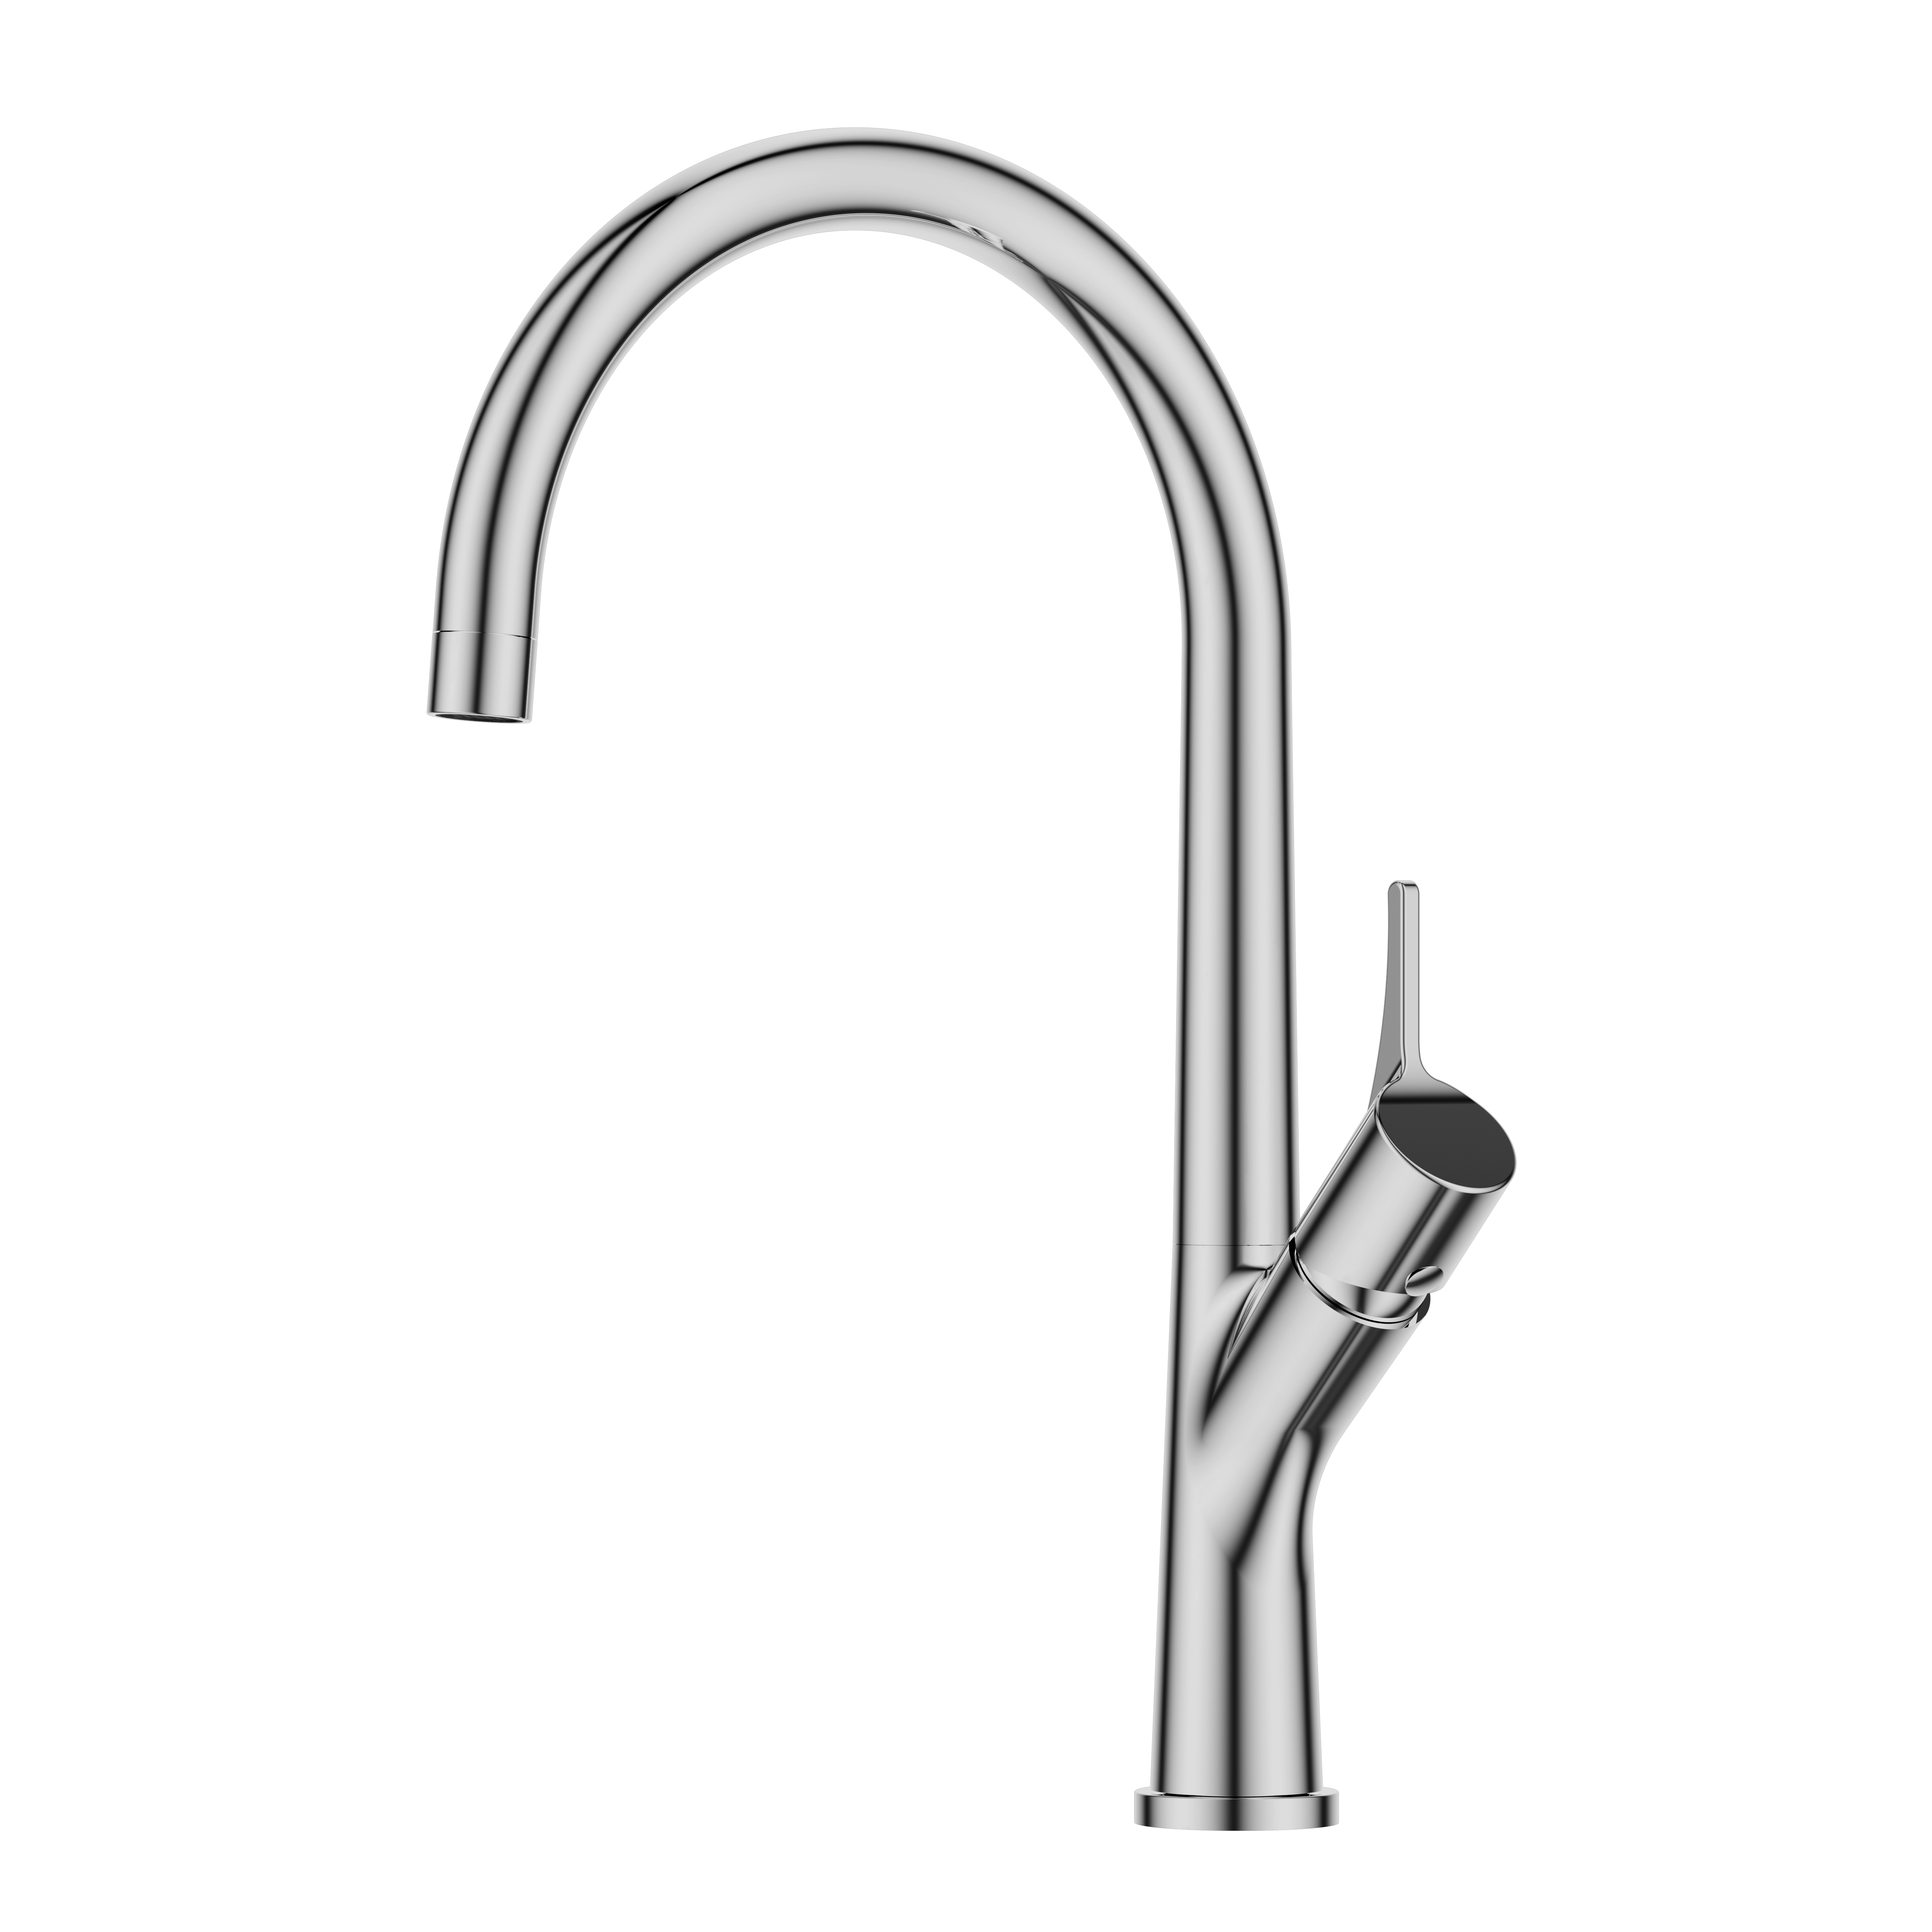 Common Style Kitchen Faucet Material Chrome